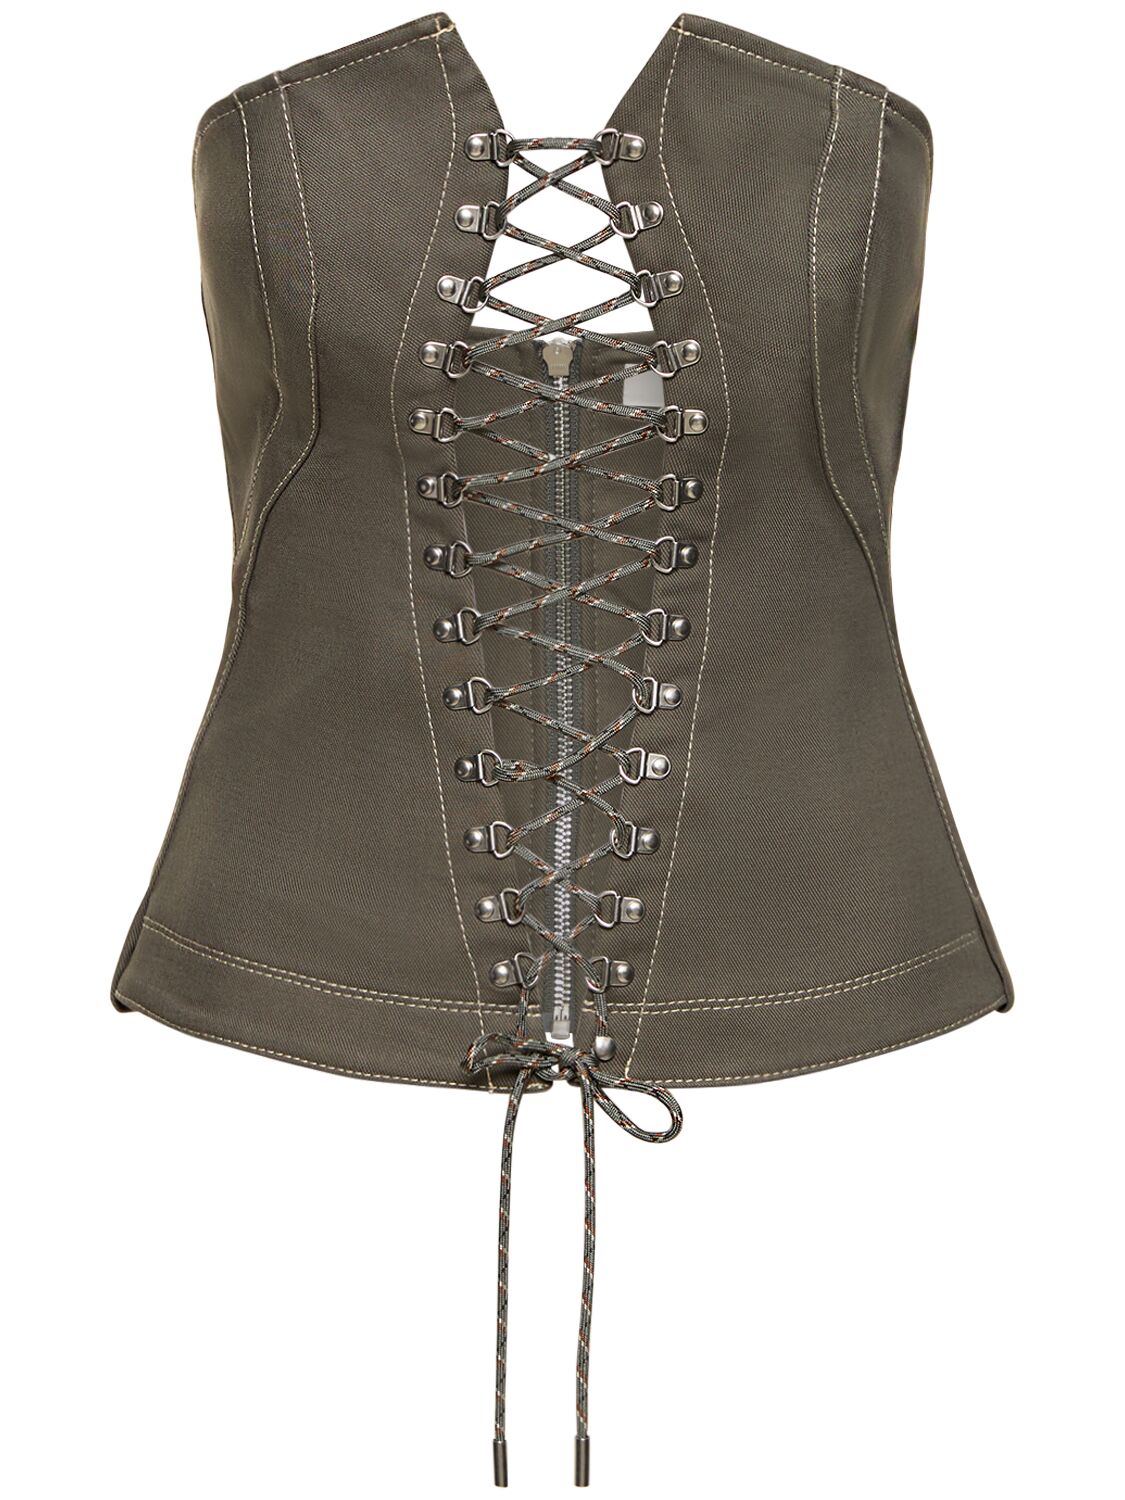 Image of Cotton Denim Laced Hiking Corset Top